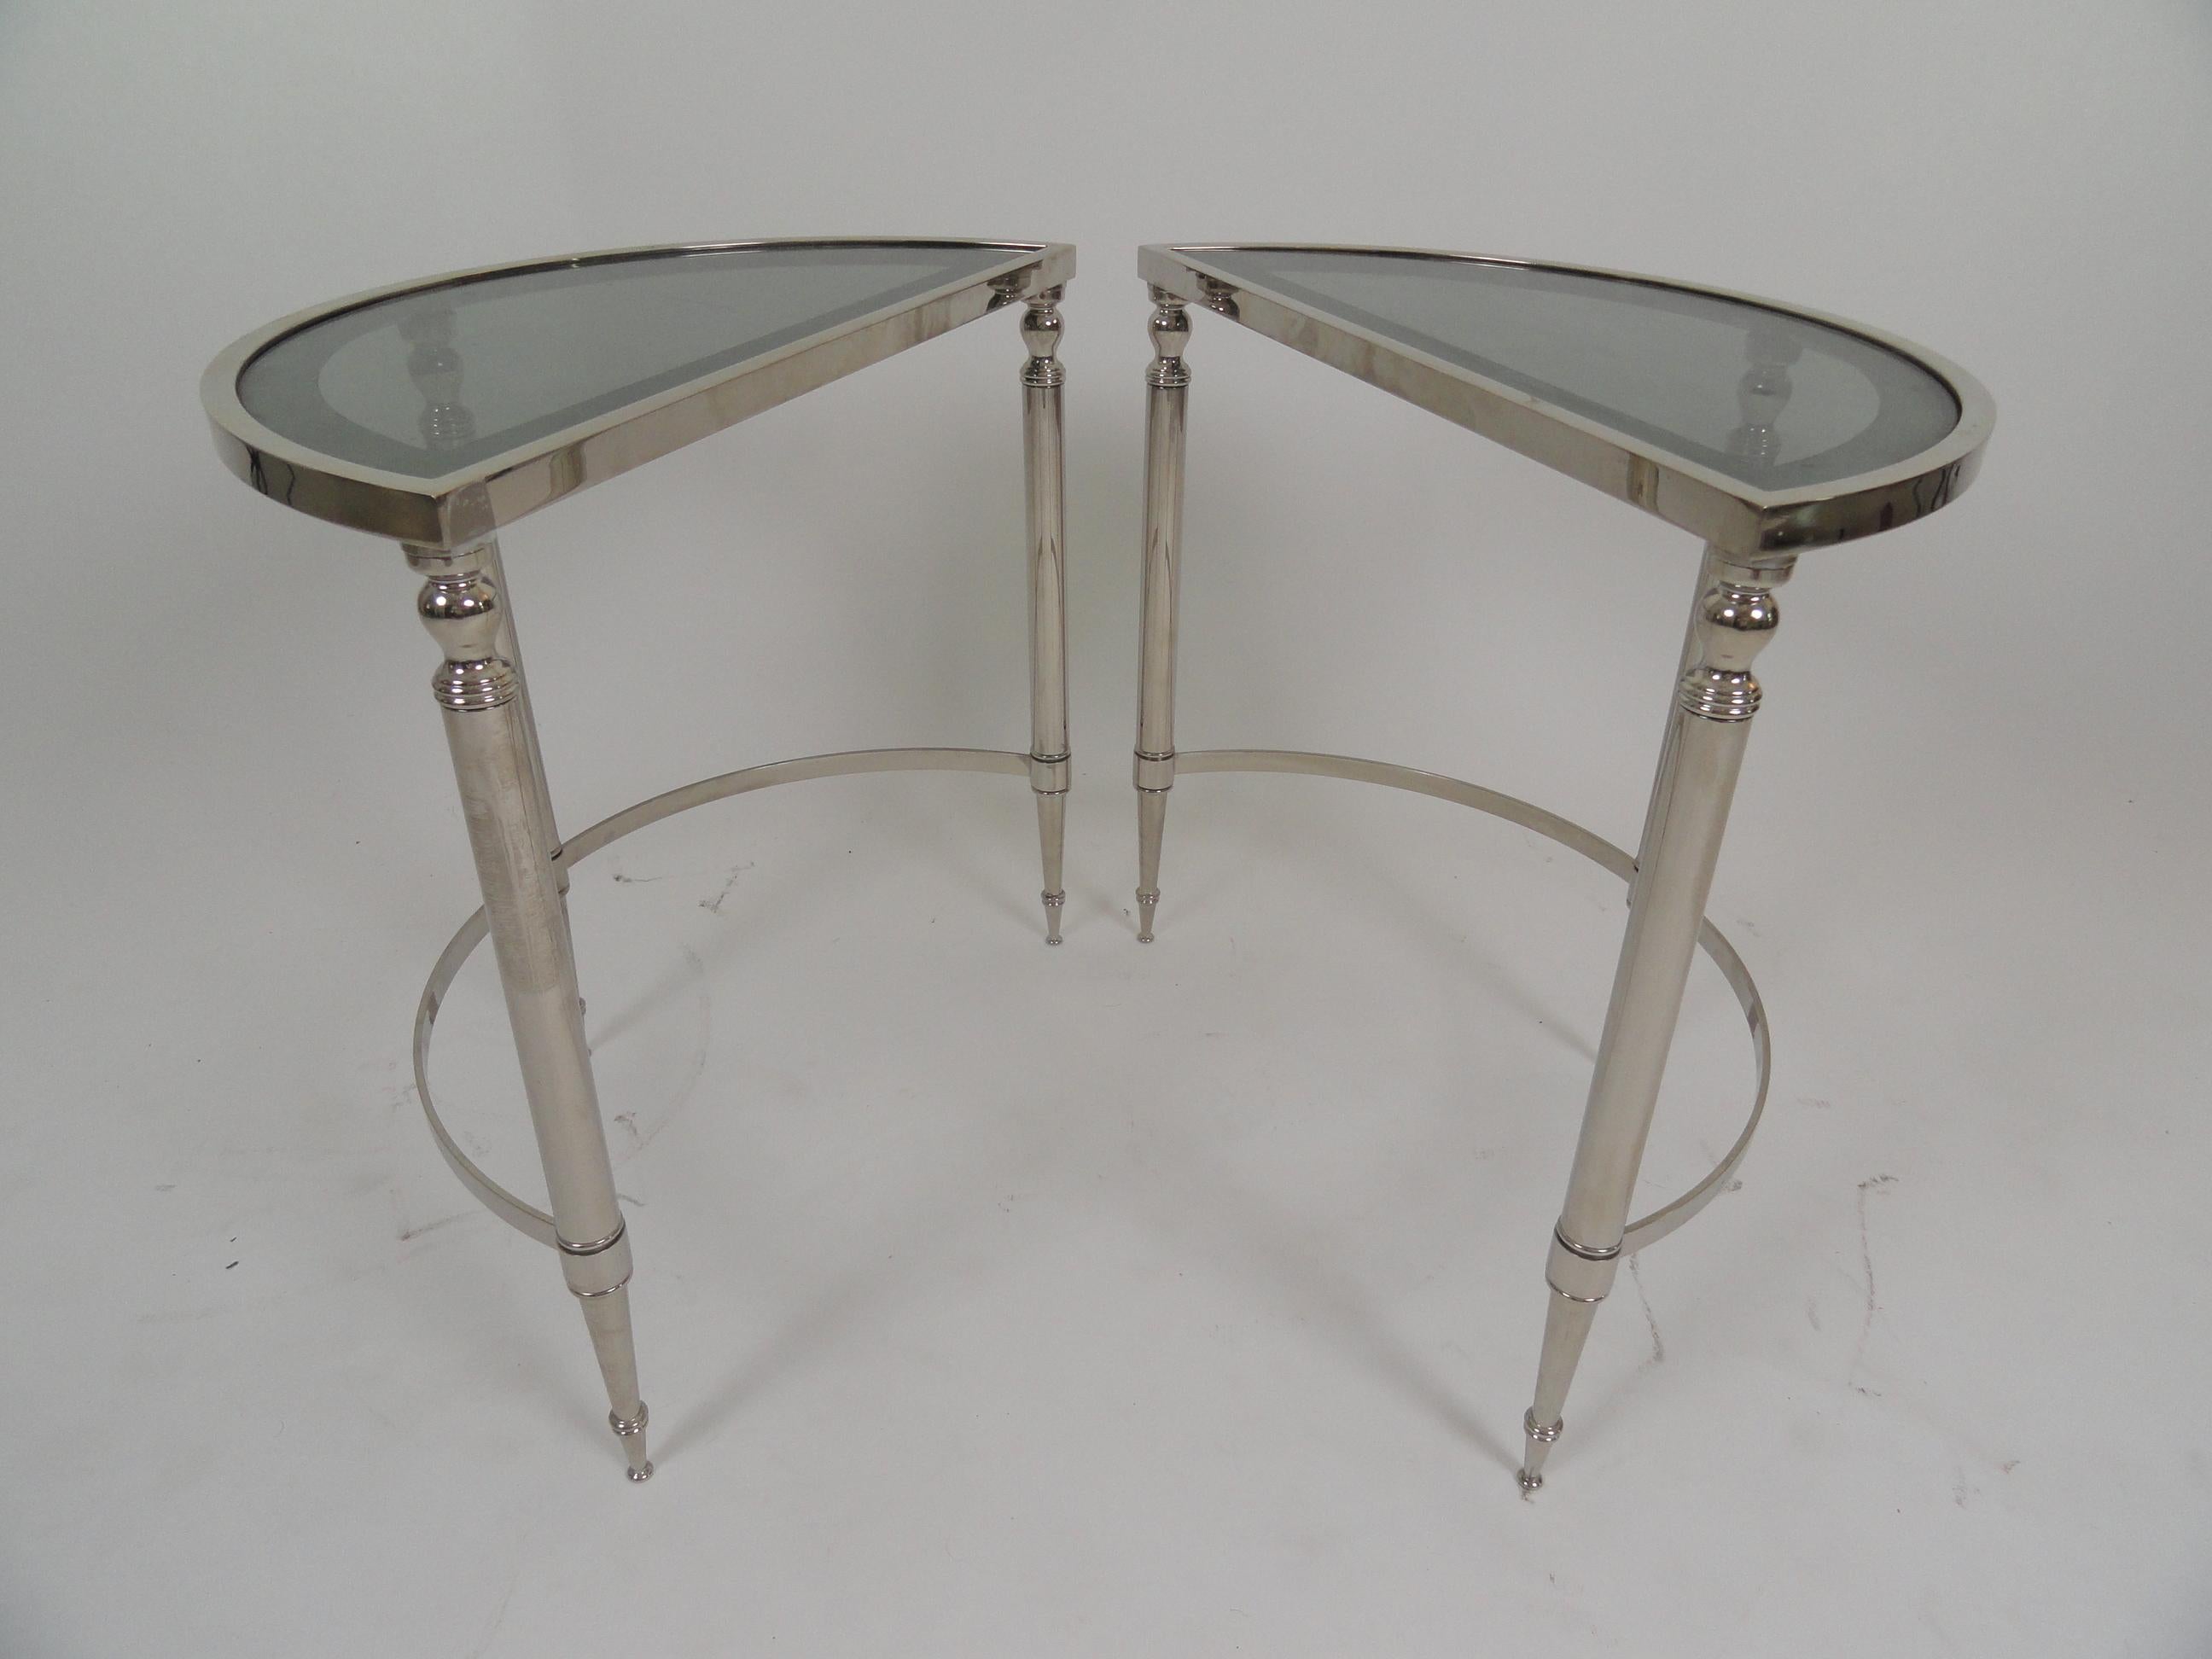 Pair of recently nickel-plated demilune tables with antiqued glass insert tops. Tables may be used together to form a round table or separately to make two half-circle tables. Nickel plating is recent and in very good condition.